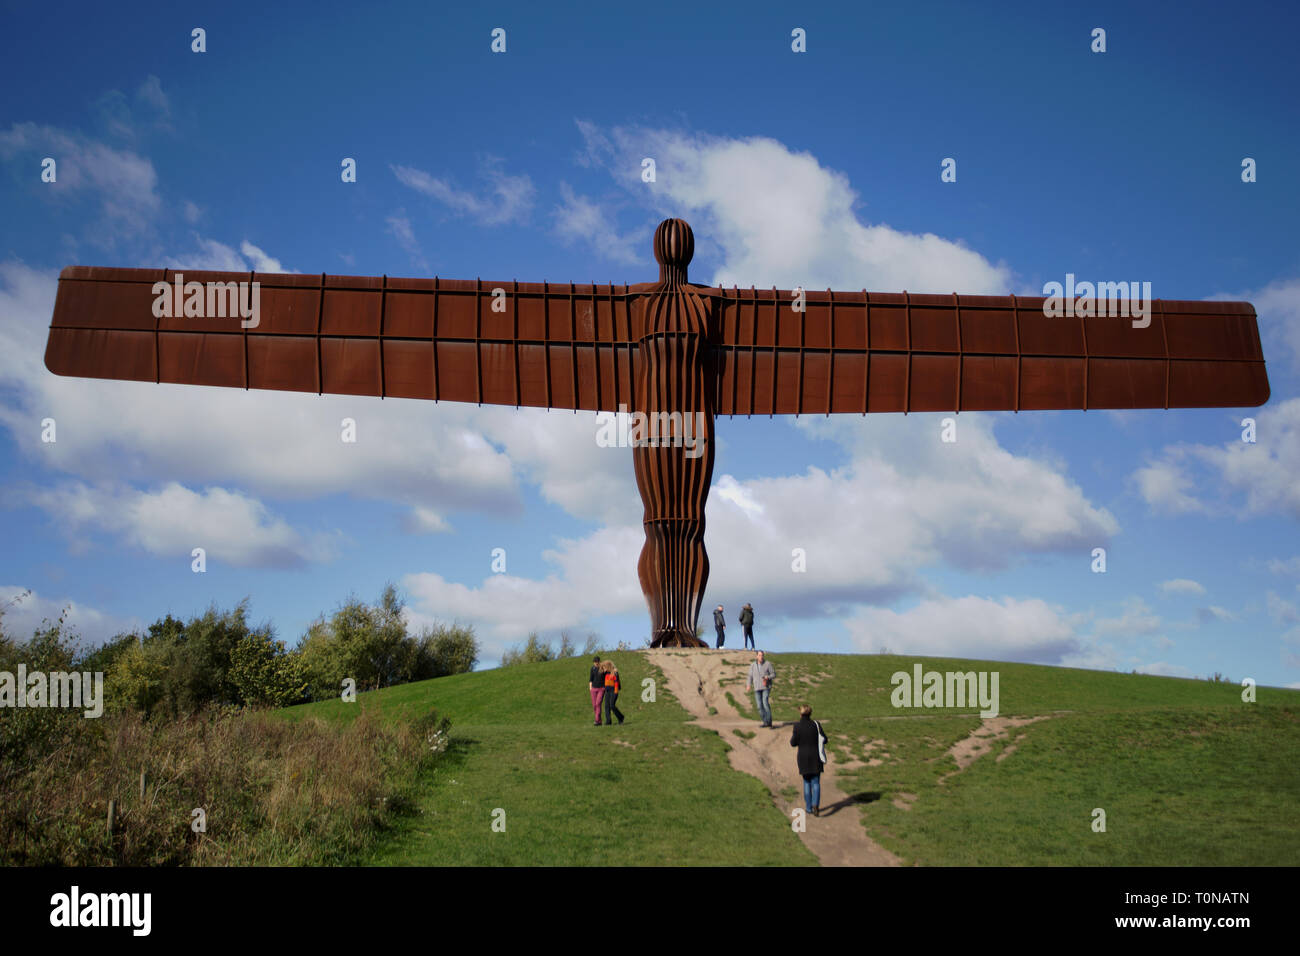 The Angel of the North: a 20 metres tall steel scultpture of an angel designed by Antony Gormley at Lamesley near Gateshead in Tyne and Wear. Stock Photo